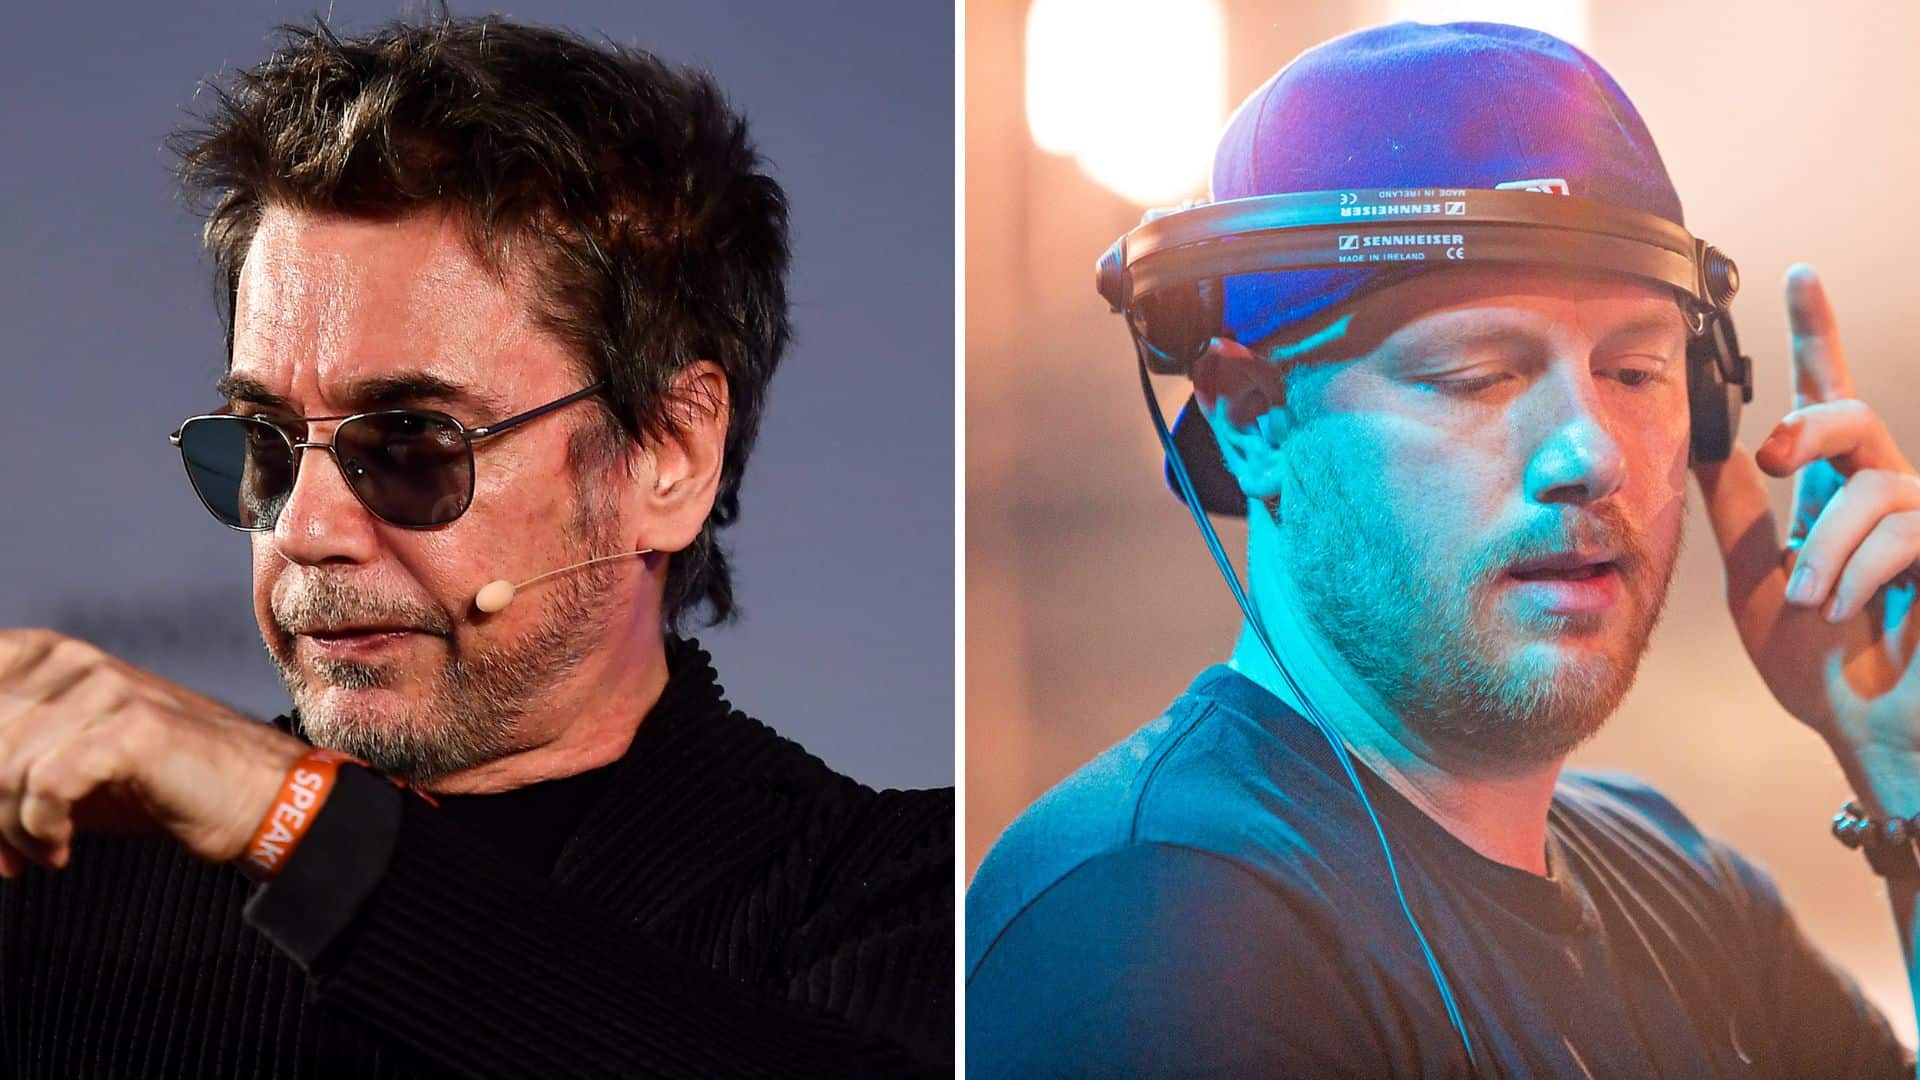 Jean-Michel Jarre & Eric Prydz collaboration may happen in the future